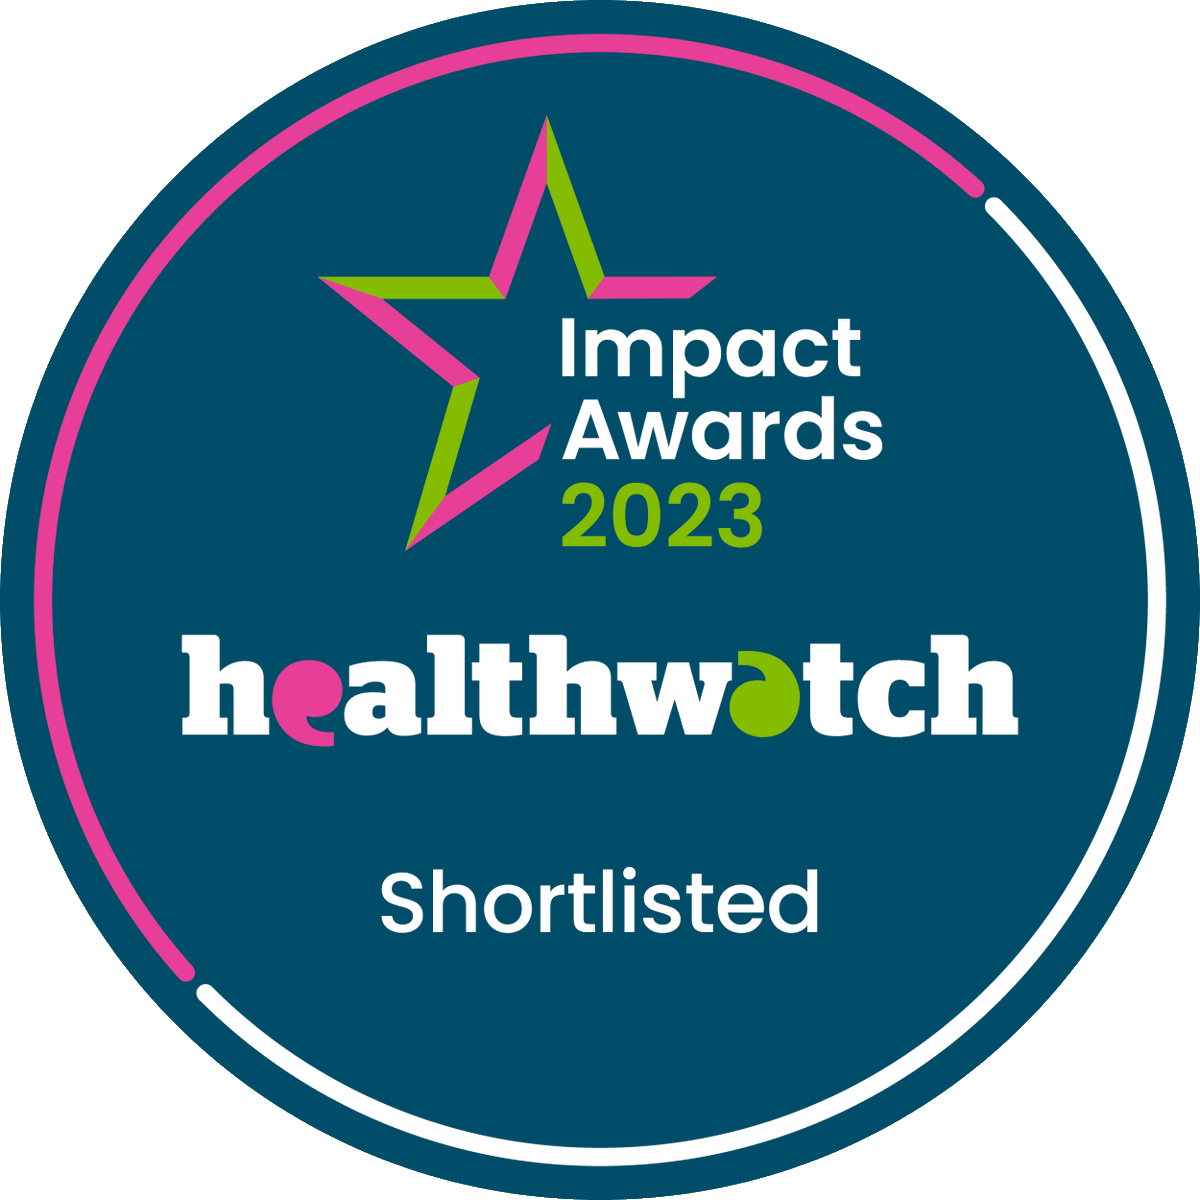 Healthwatch Blackpool has been shortlisted for the @HealthwatchE Impact Award!🤩 This is for our work on Children & Young People and vaping Thank you to our wonderful Blackpool community! Our Work👉 bit.ly/3UtTfJw The Awards👉bit.ly/3So2xUQ